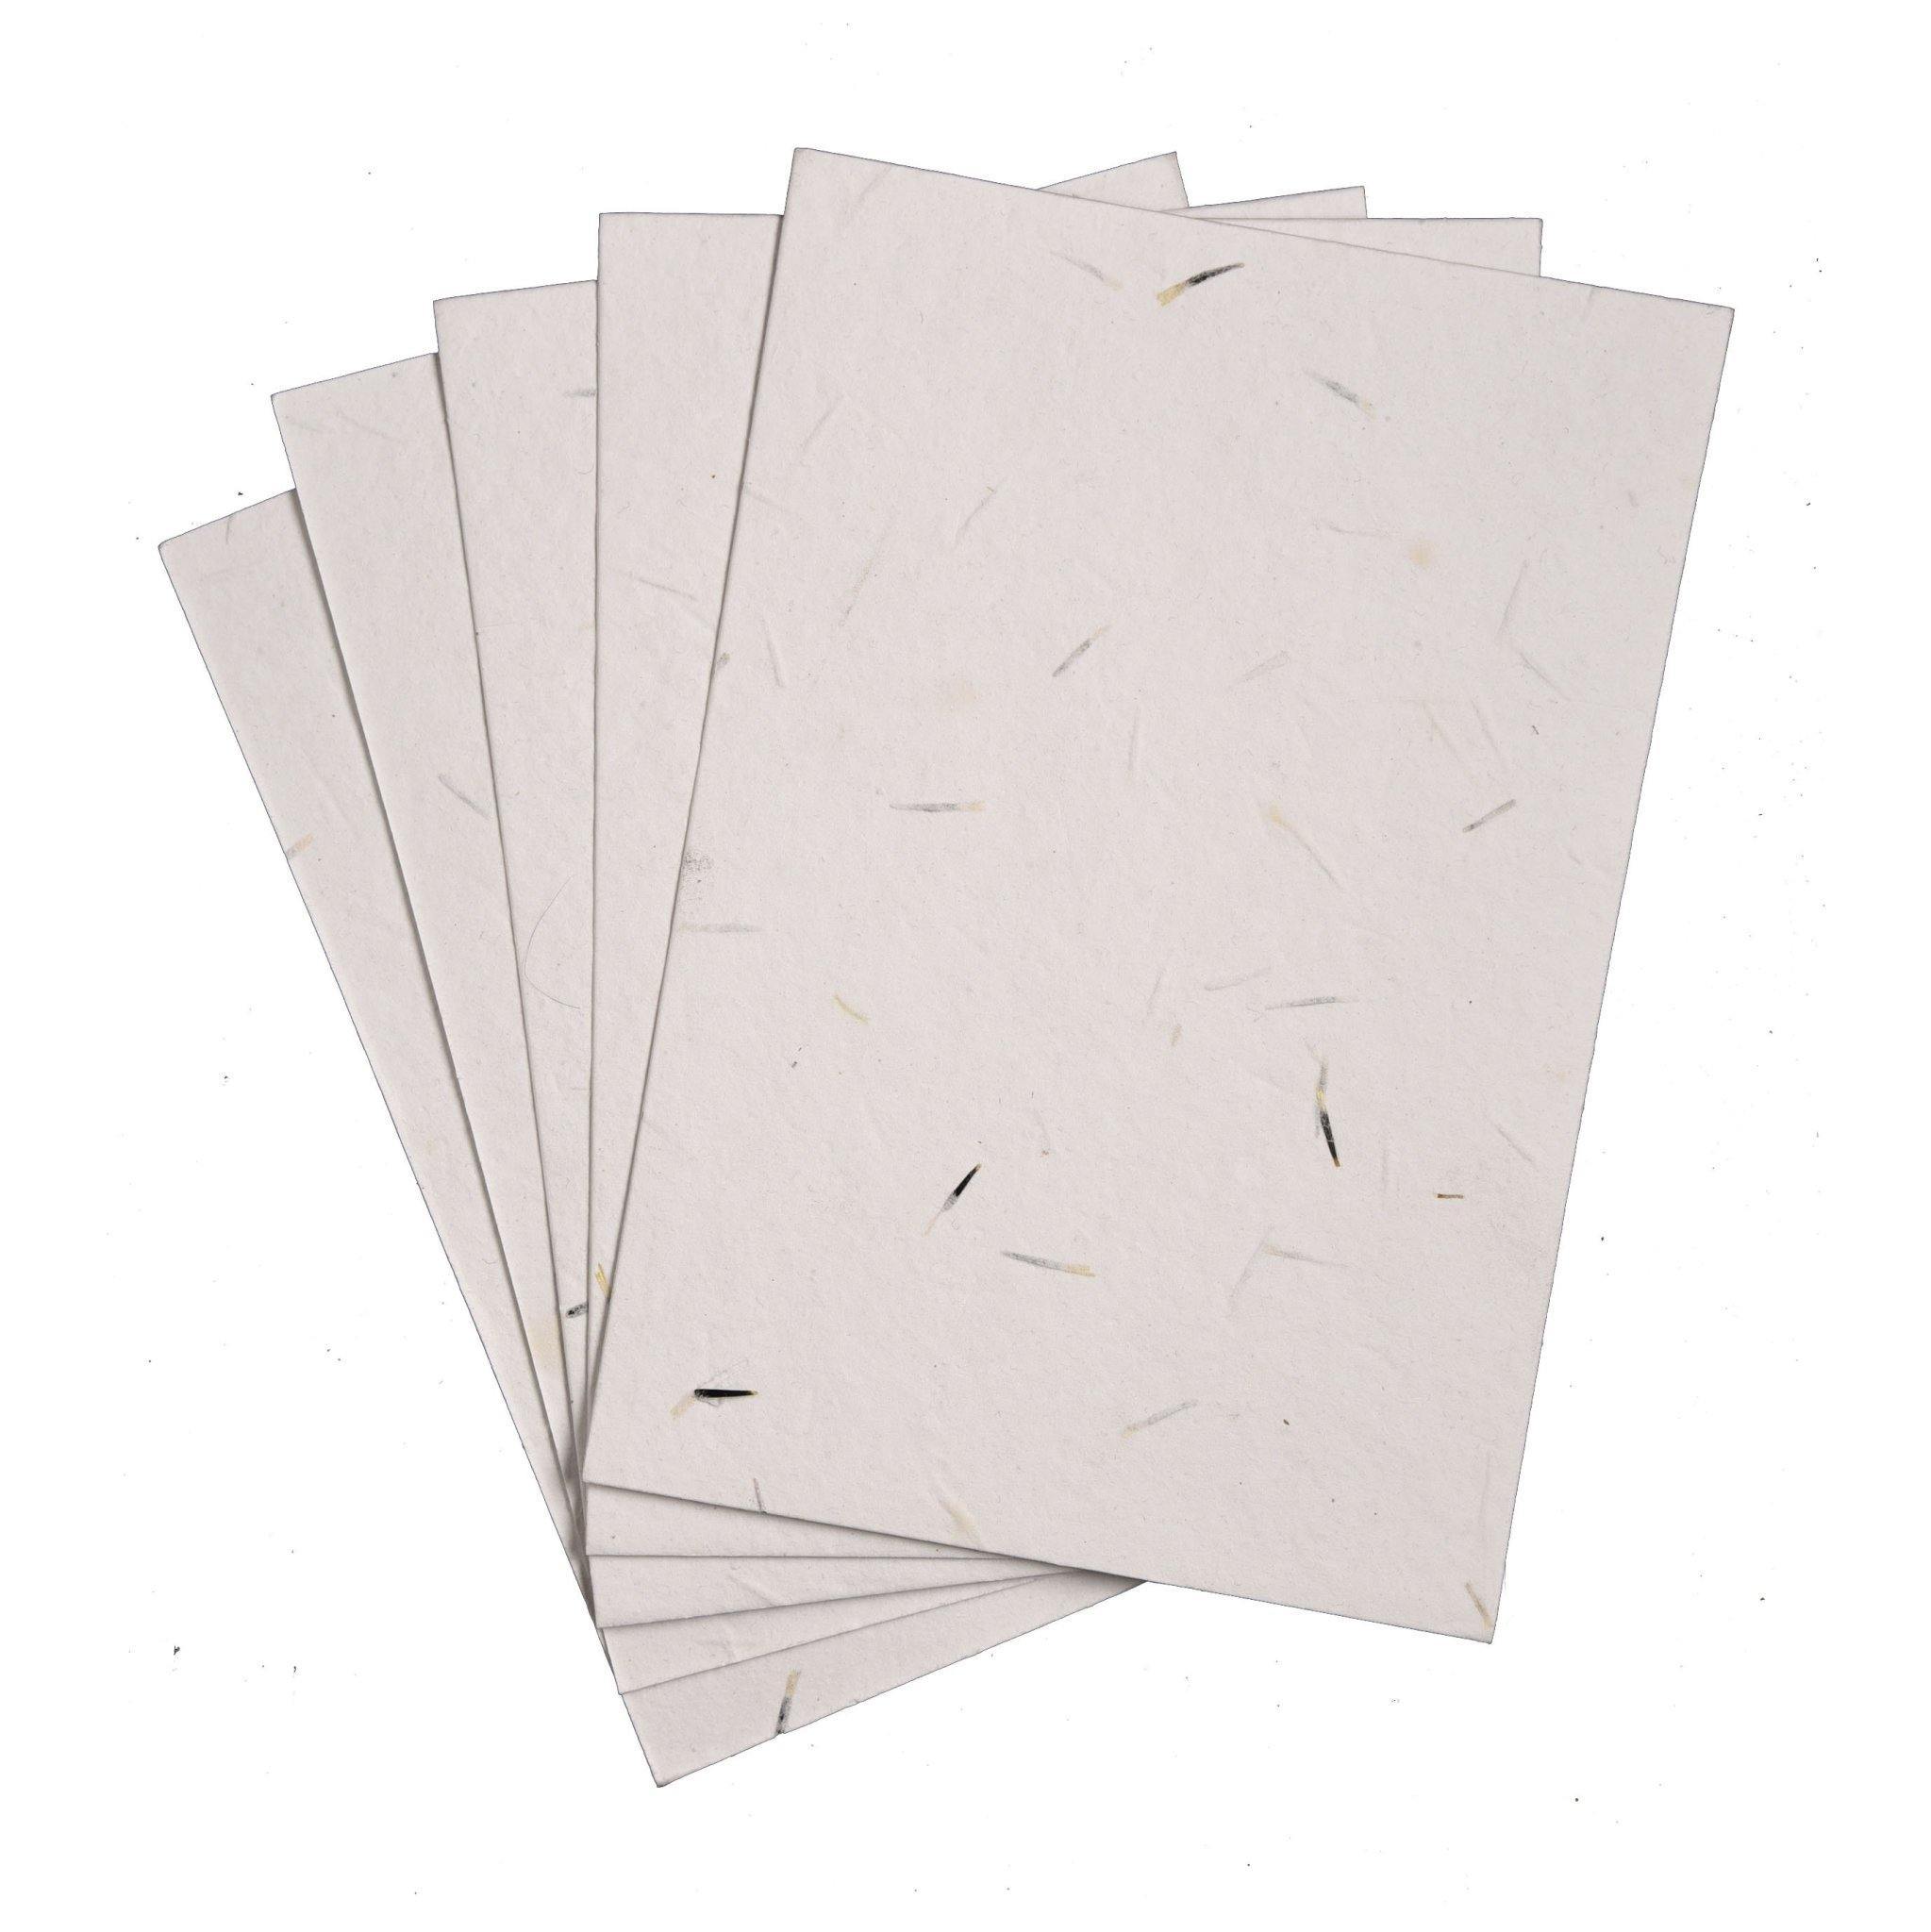  10 x A5 Plantable Seed Paper/Card - Print at Home Craft Paper  with Wildflower Seed Mix… : Office Products